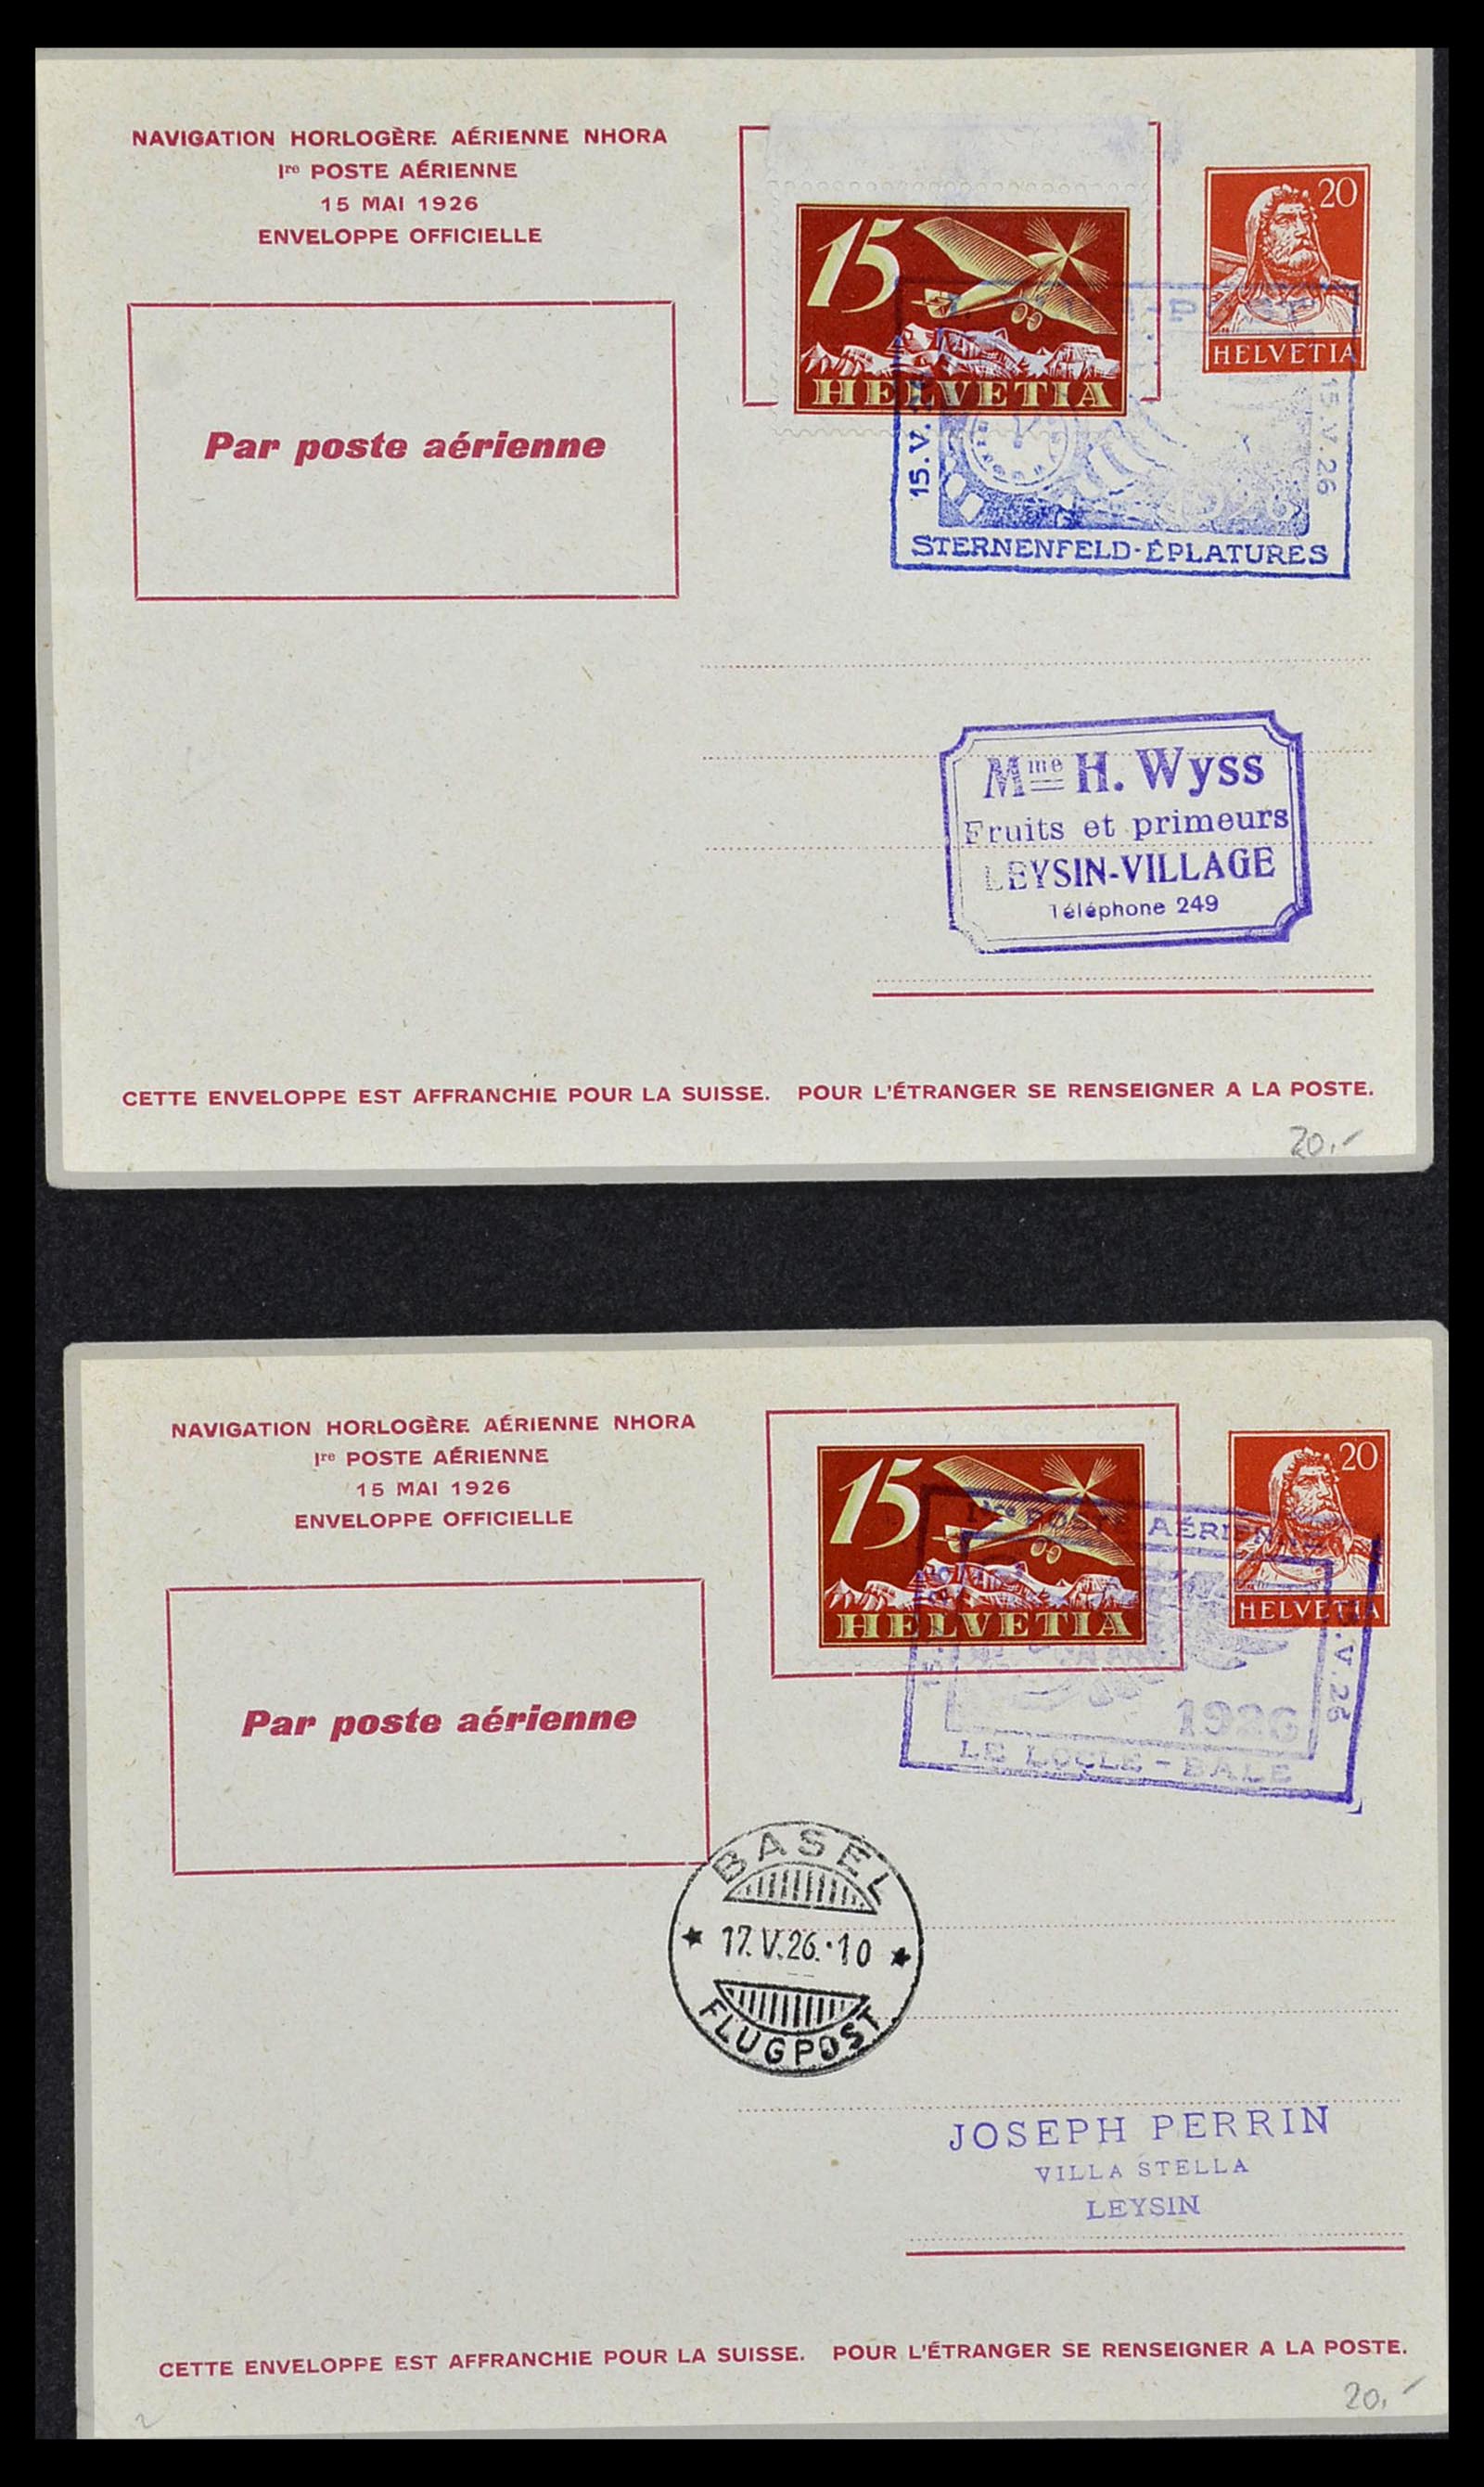 34141 017 - Stamp collection 34141 Switzerland airmail covers 1920-1960.